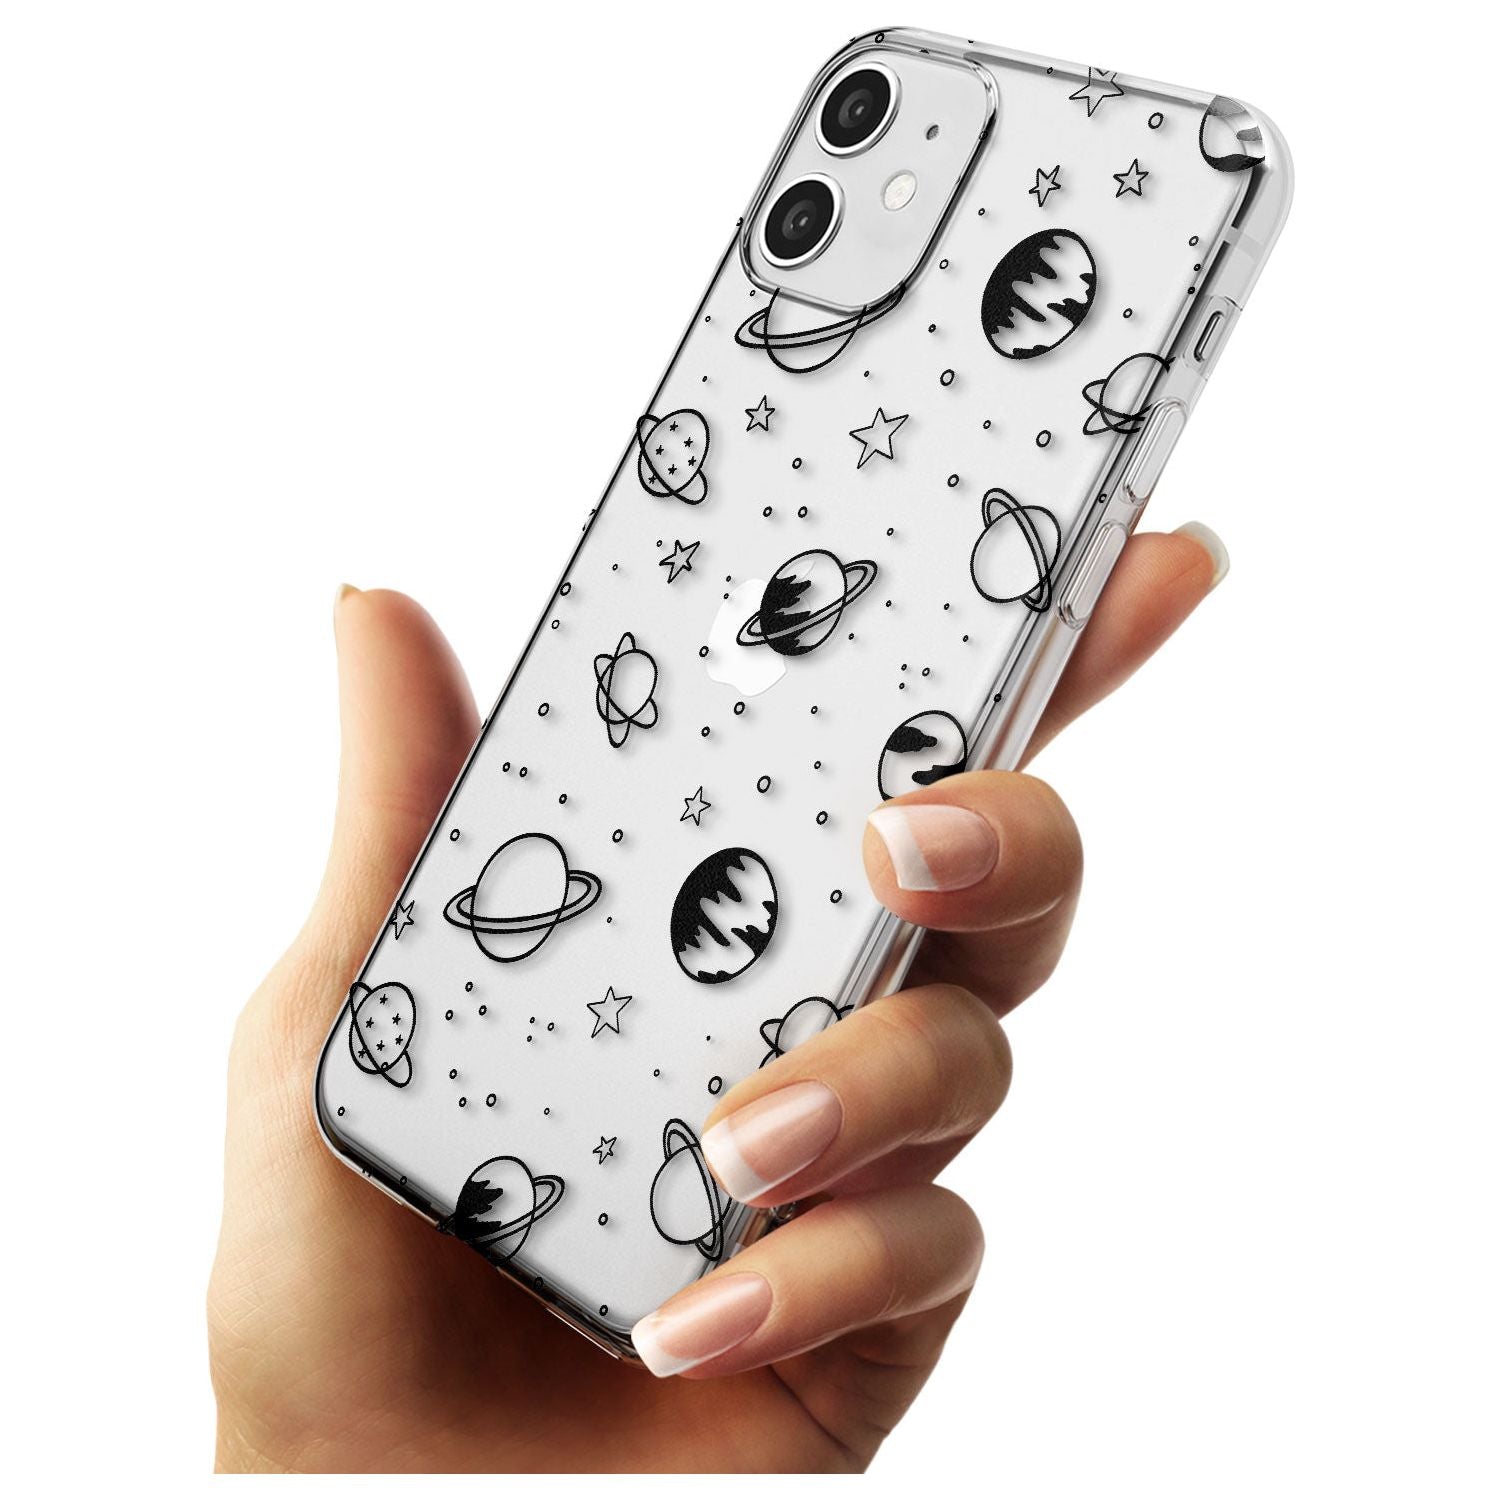 Outer Space Outlines: Black on Clear Black Impact Phone Case for iPhone 11